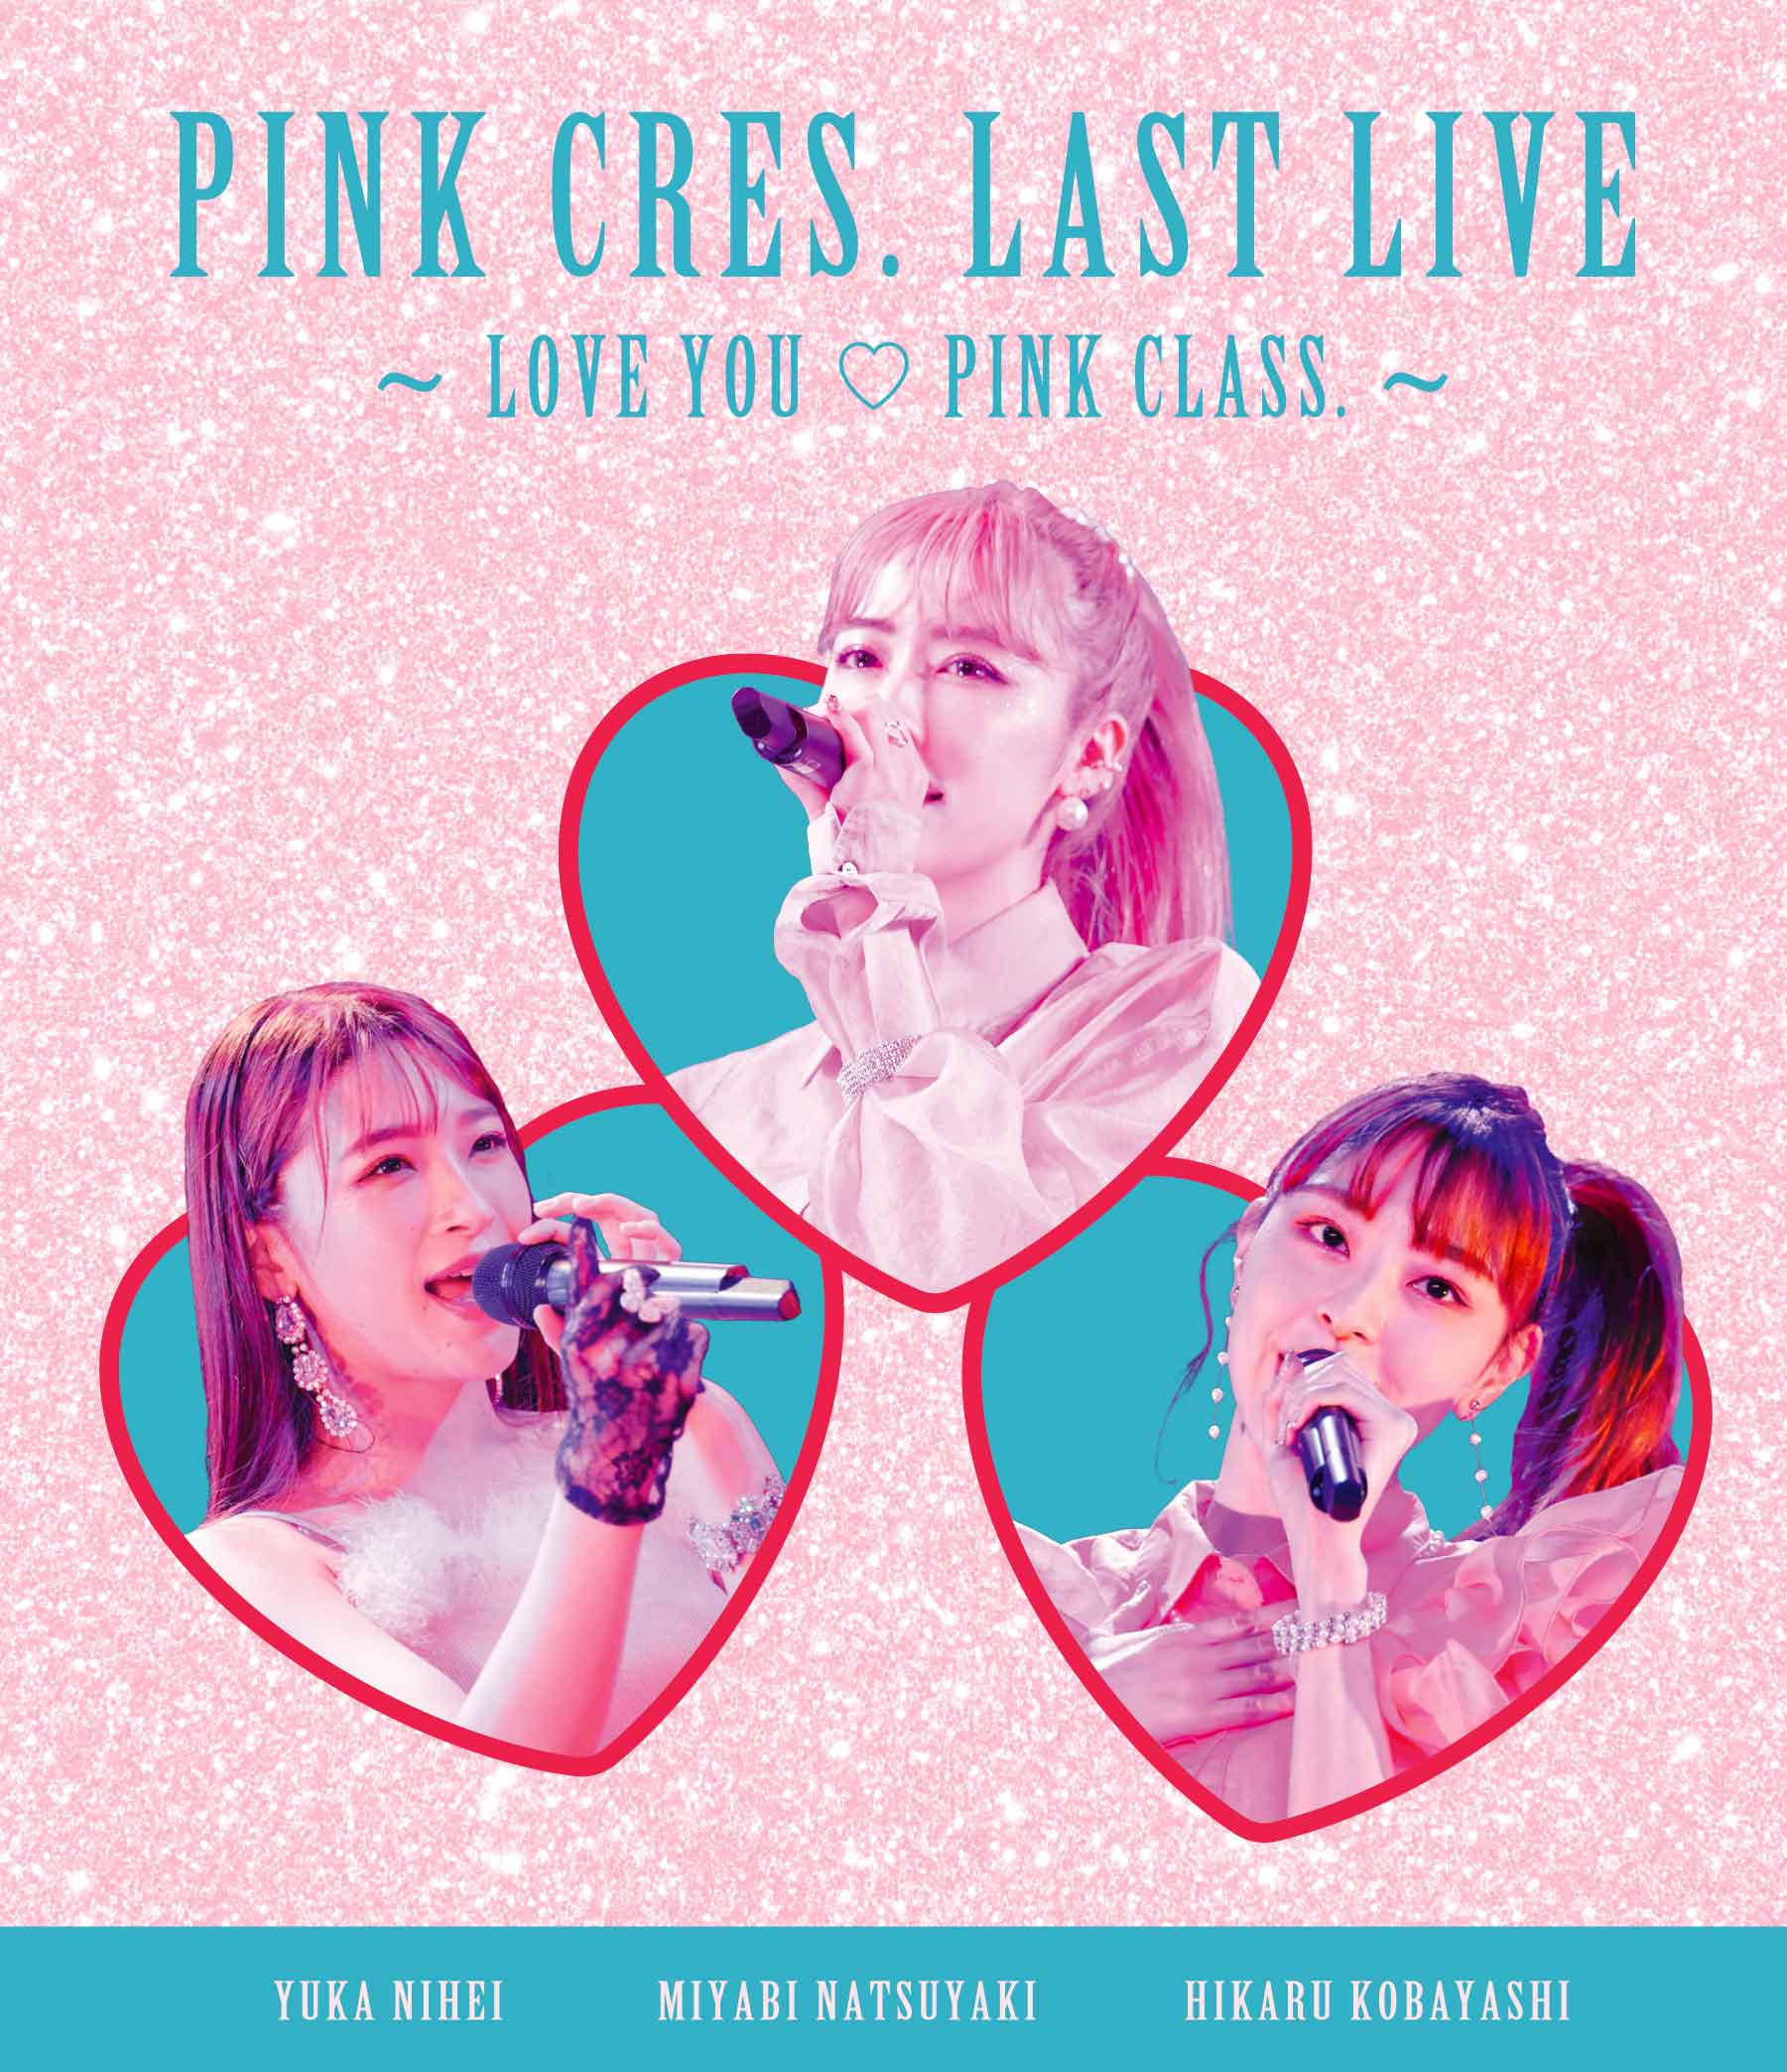 BD「PINK CRES. LAST LIVE ～LOVE YOU ♡ PINK CLASS. ～」※特典なし